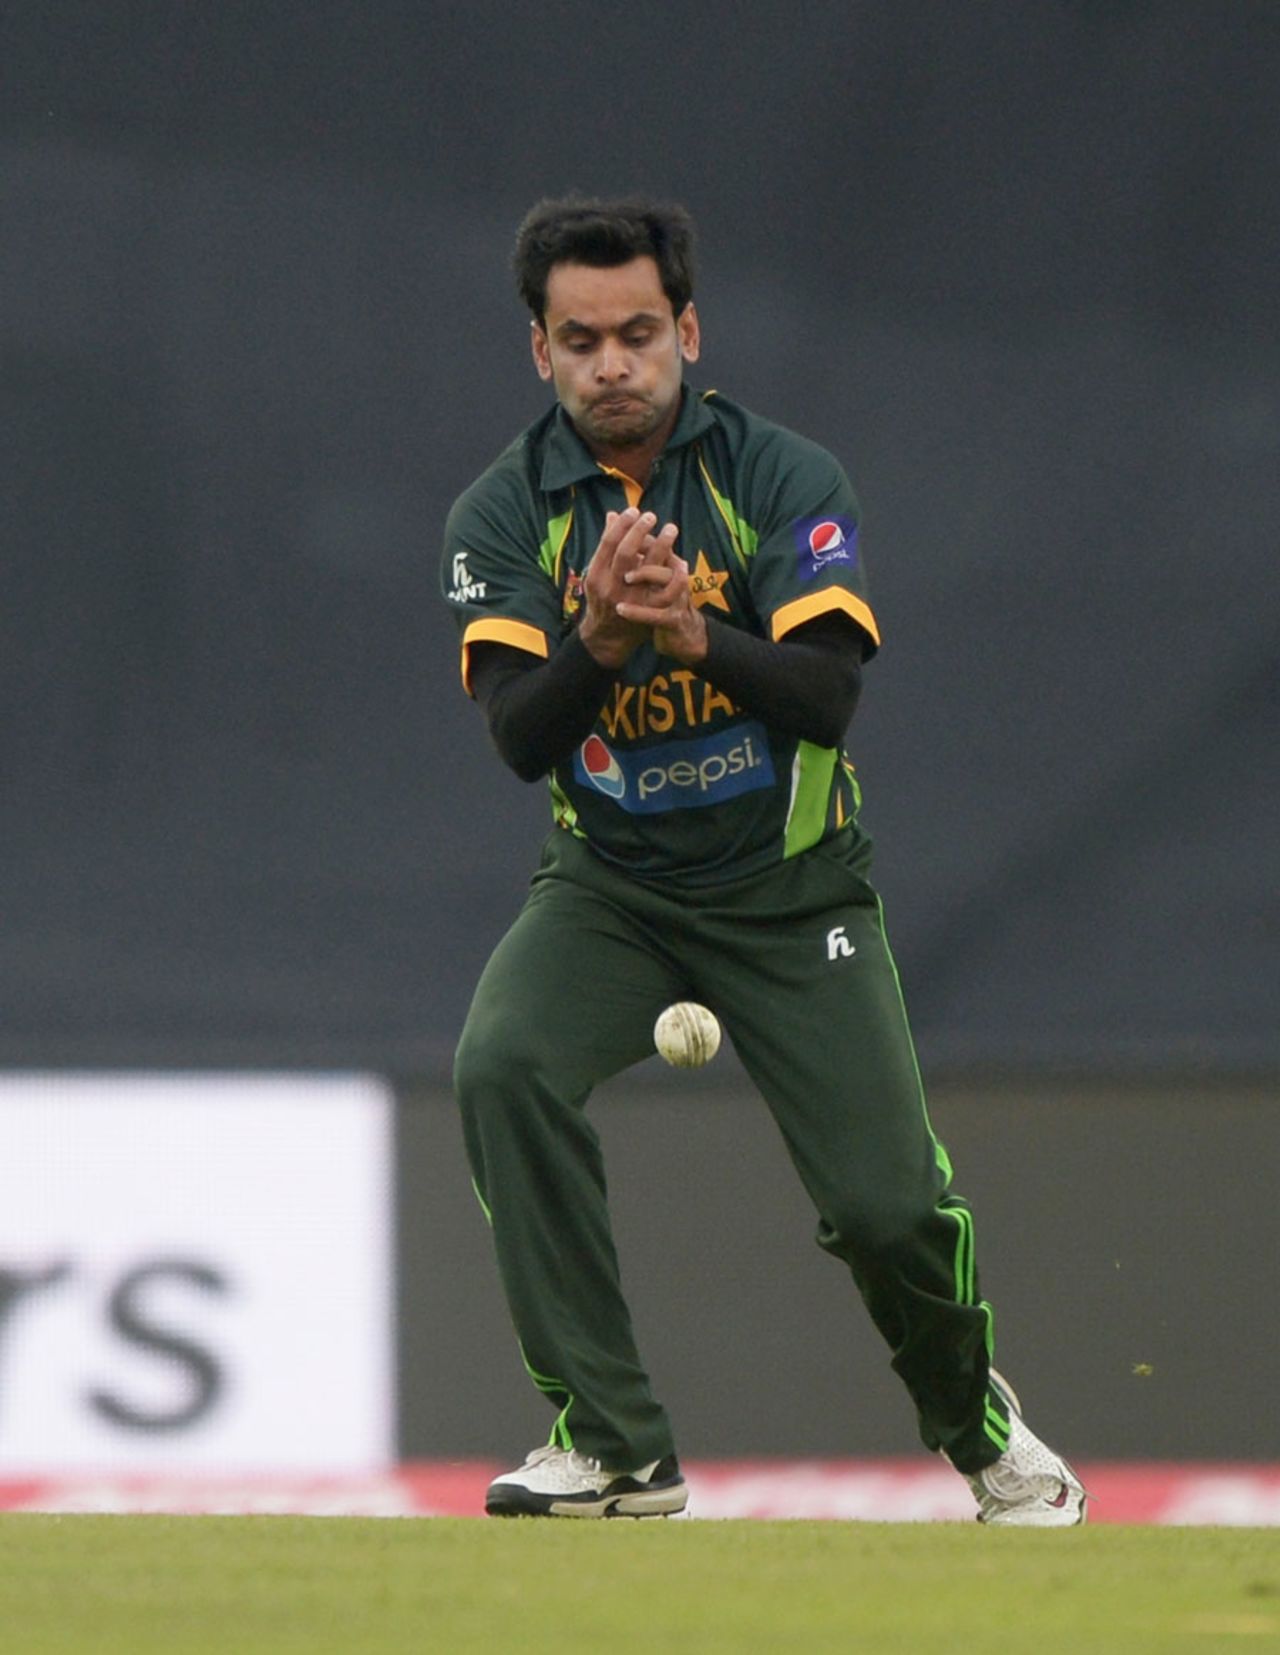 Mohammad Hafeez drops a catch from Ravindra Jadeja, India v Pakistan, Asia Cup, Mirpur, March 2, 2014